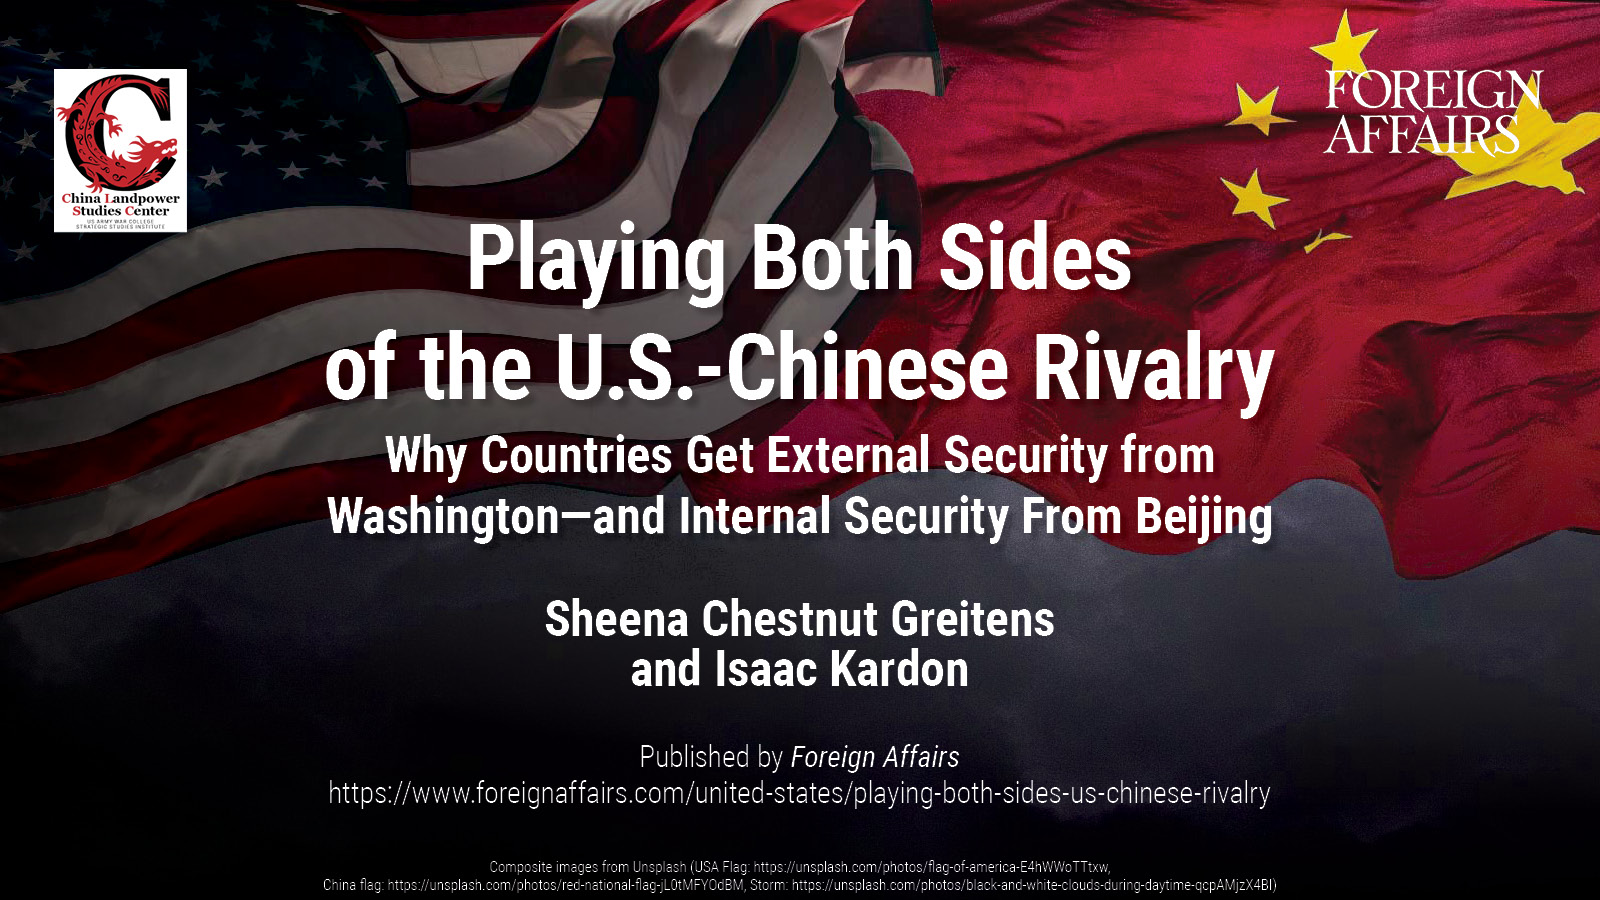 Playing Both Sides of the U.S.-Chinese Rivalry | Why Countries Get External Security from Washington—and Internal Security From Beijing | Sheena Chestnut Greitens and Isaac Kardon